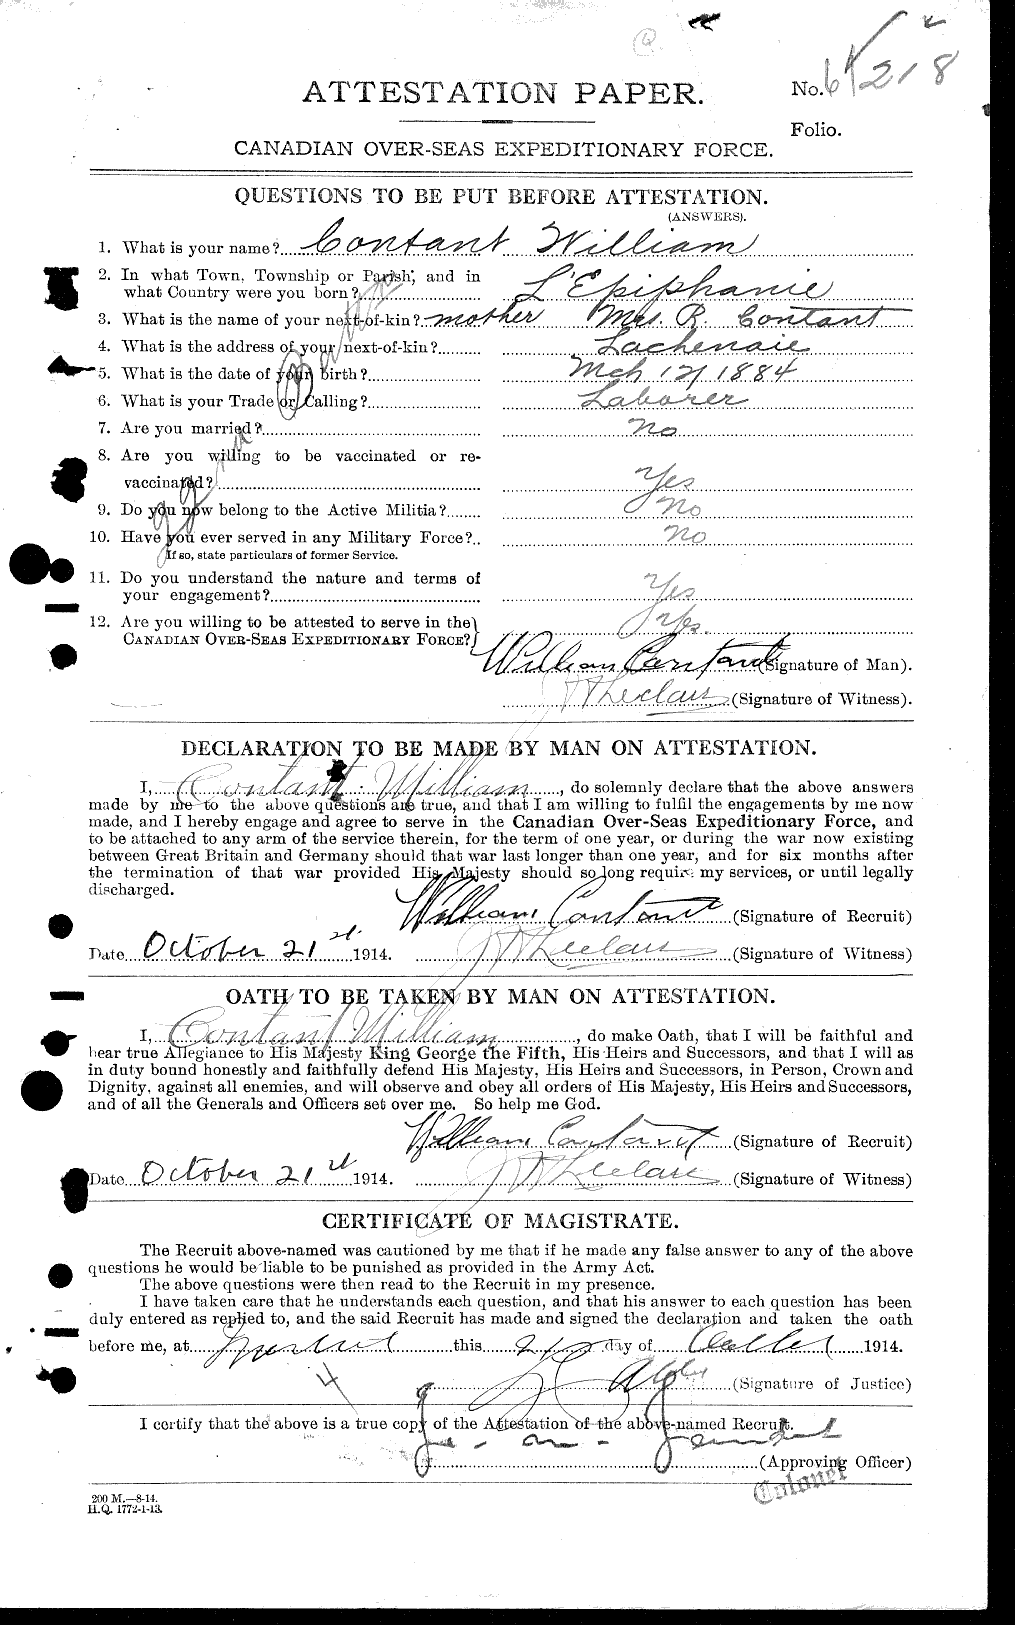 Personnel Records of the First World War - CEF 038645a